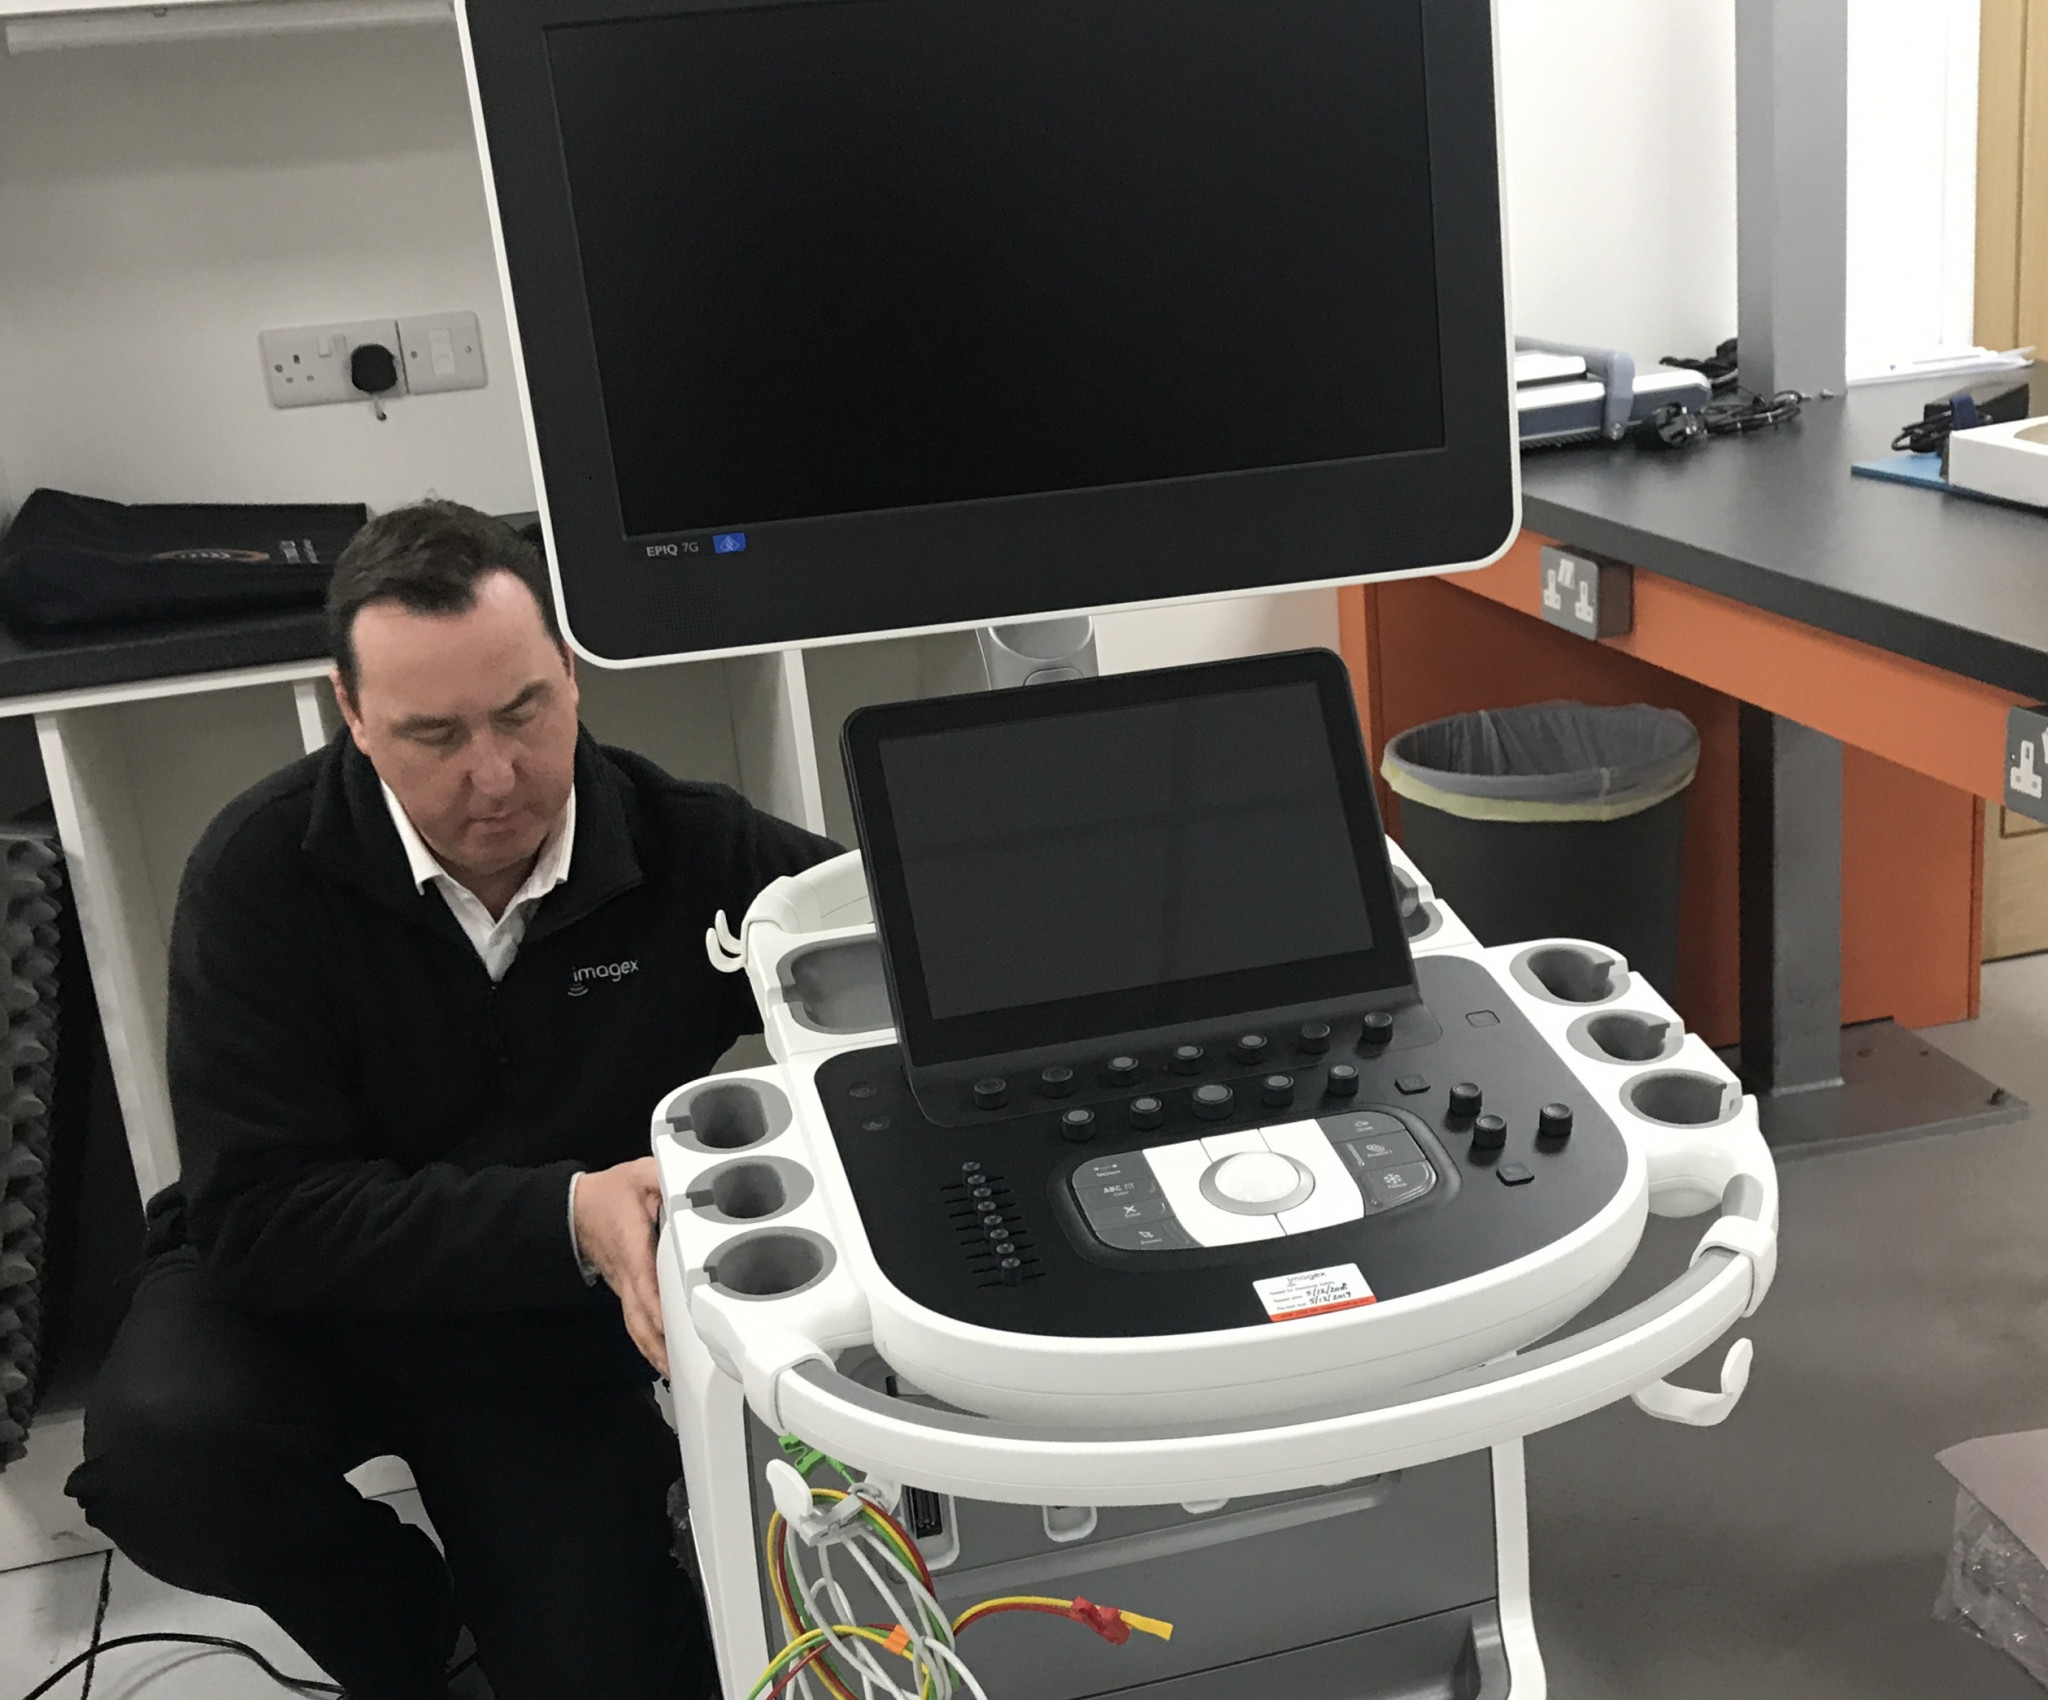 Specialist multi-vendor ultrasound service launched in UK